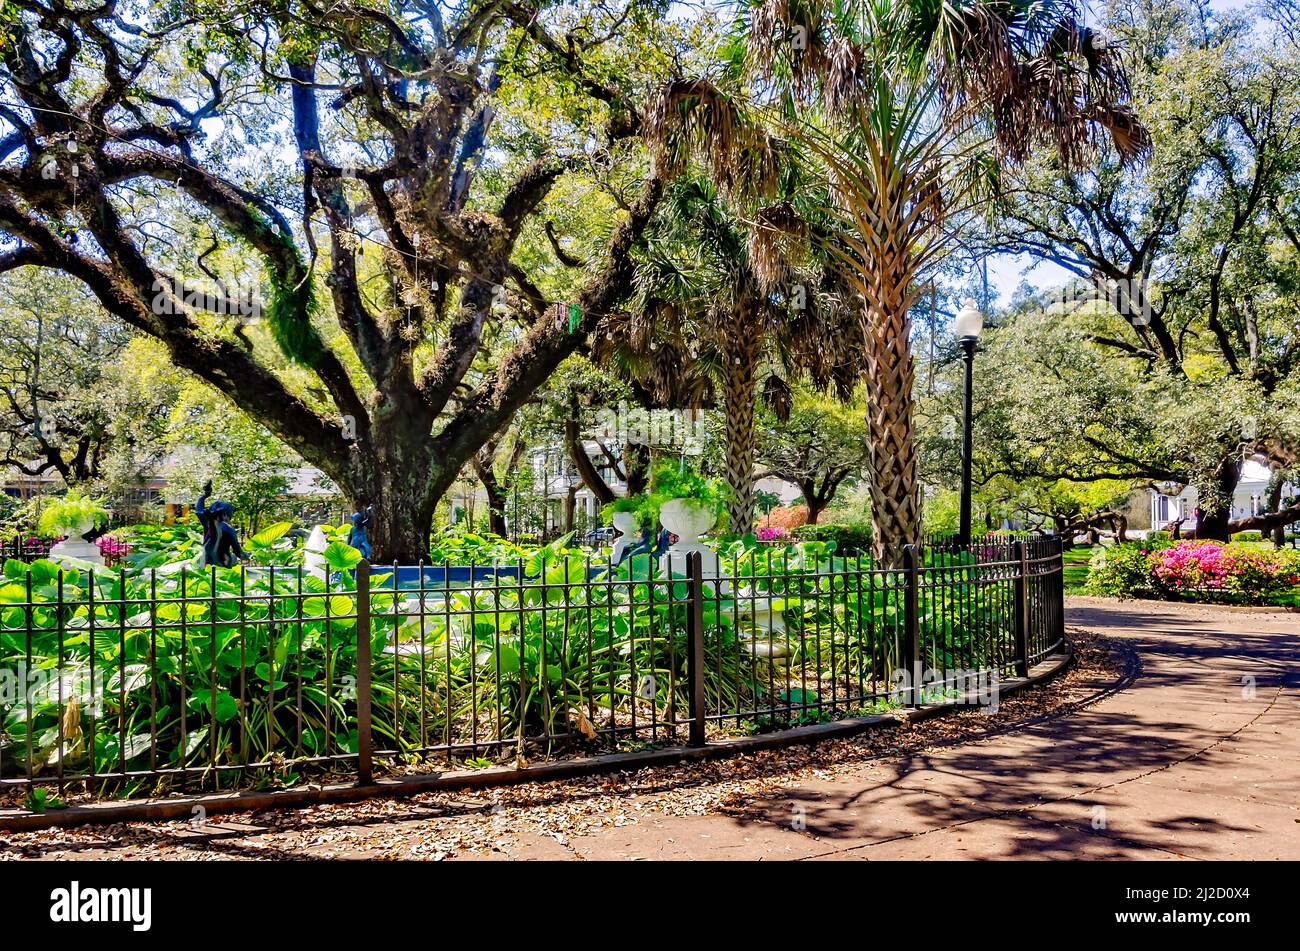 Live oak trees, azaleas, and other plants create a lush landscape in Washington Square, March 26, 2022, in Mobile, Alabama. Stock Photo